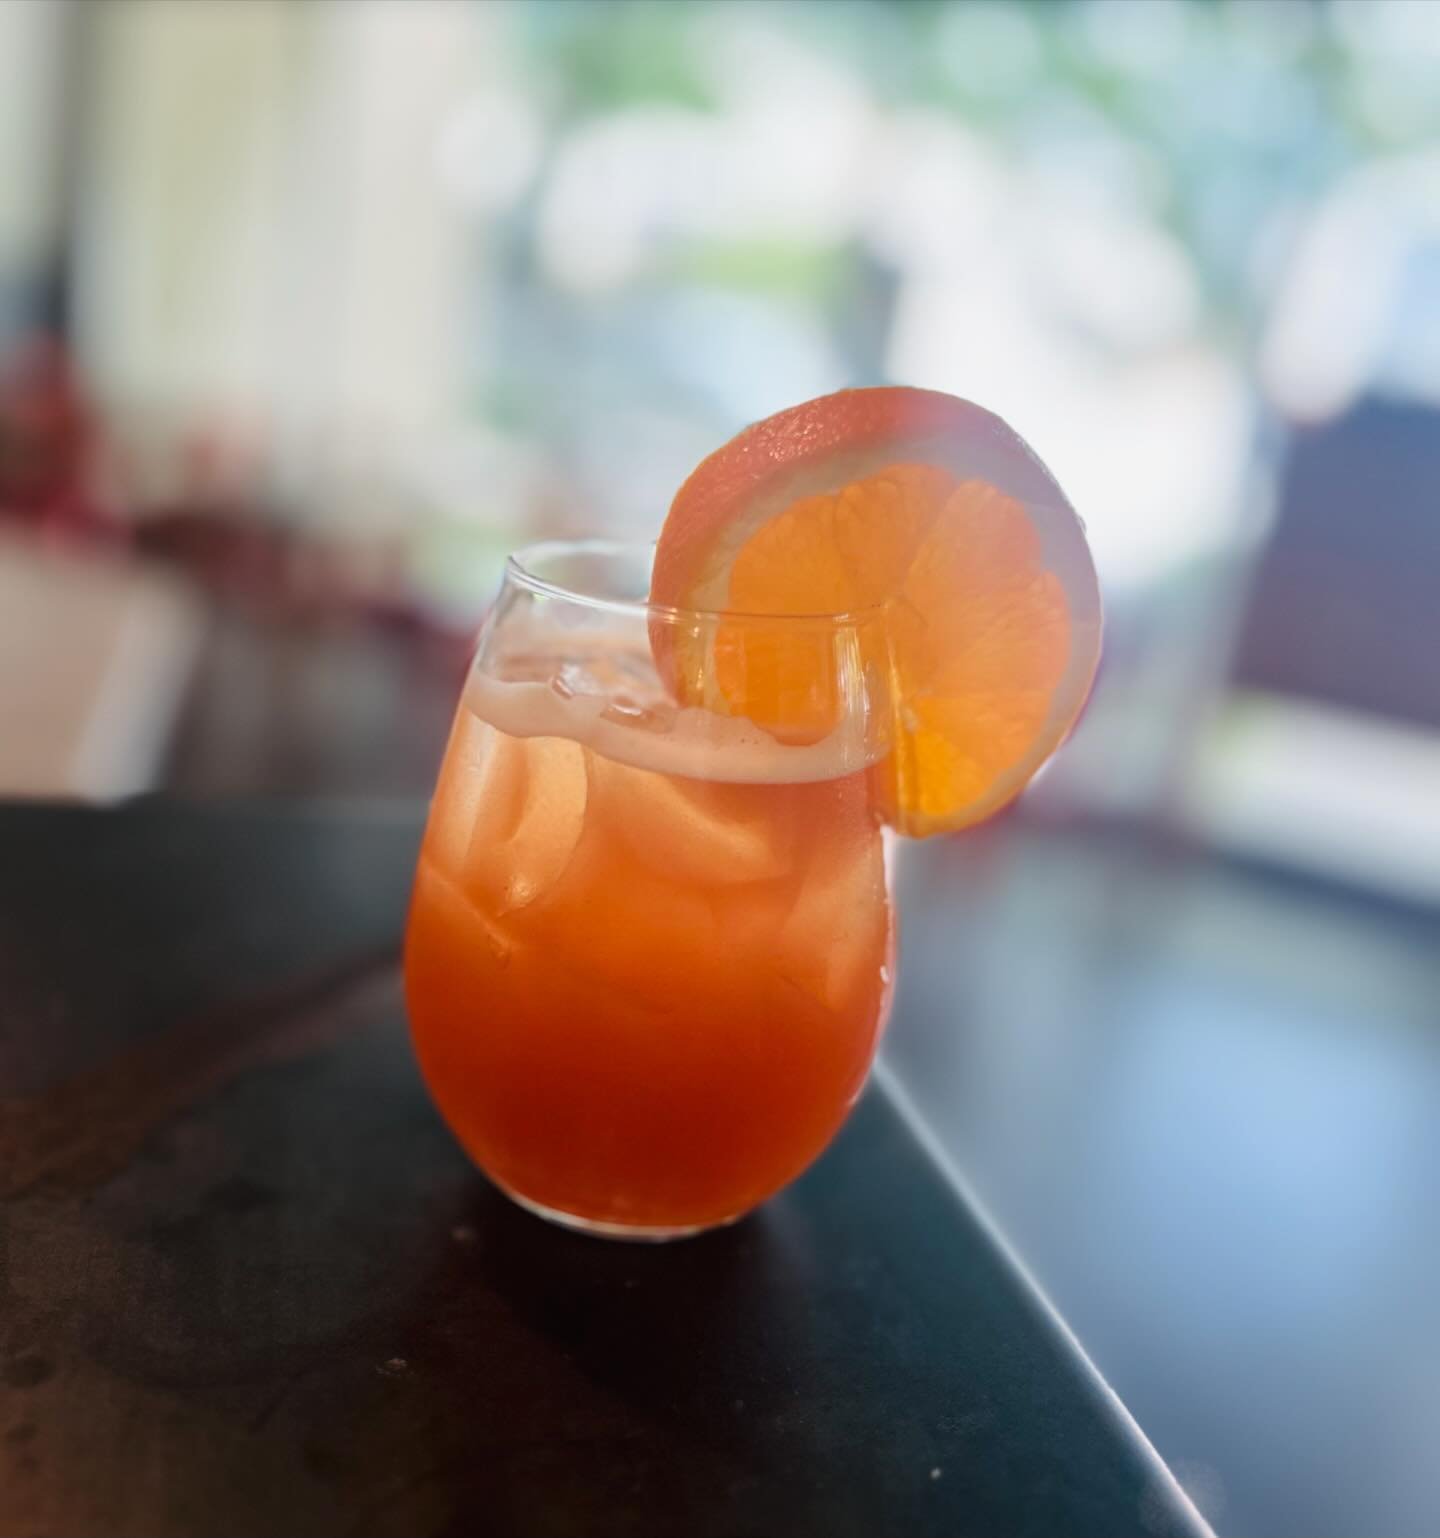 Mom deserves a good cocktail this weekend &mdash; and needs no further reason than &ldquo;Because I Said So!&rdquo;
We love that cocktail name our team came up with! Whisk Mom away to a tropical island with dark rum, coconut rum, pineapple, peach pur